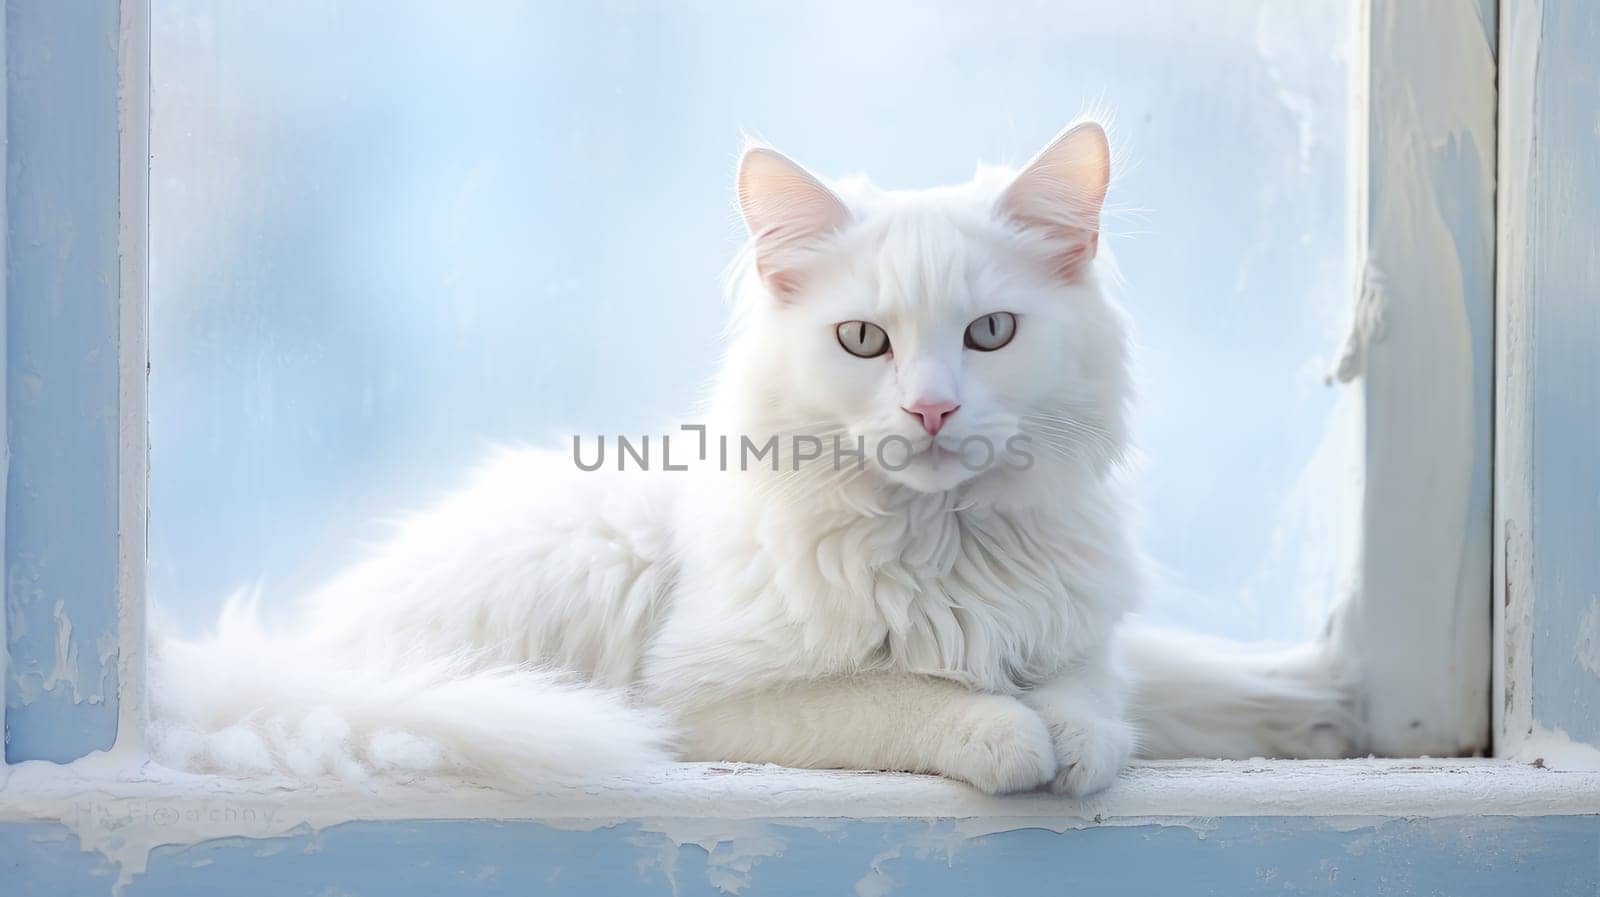 Happy, contented and cute cat, white and fluffy. by Alla_Yurtayeva